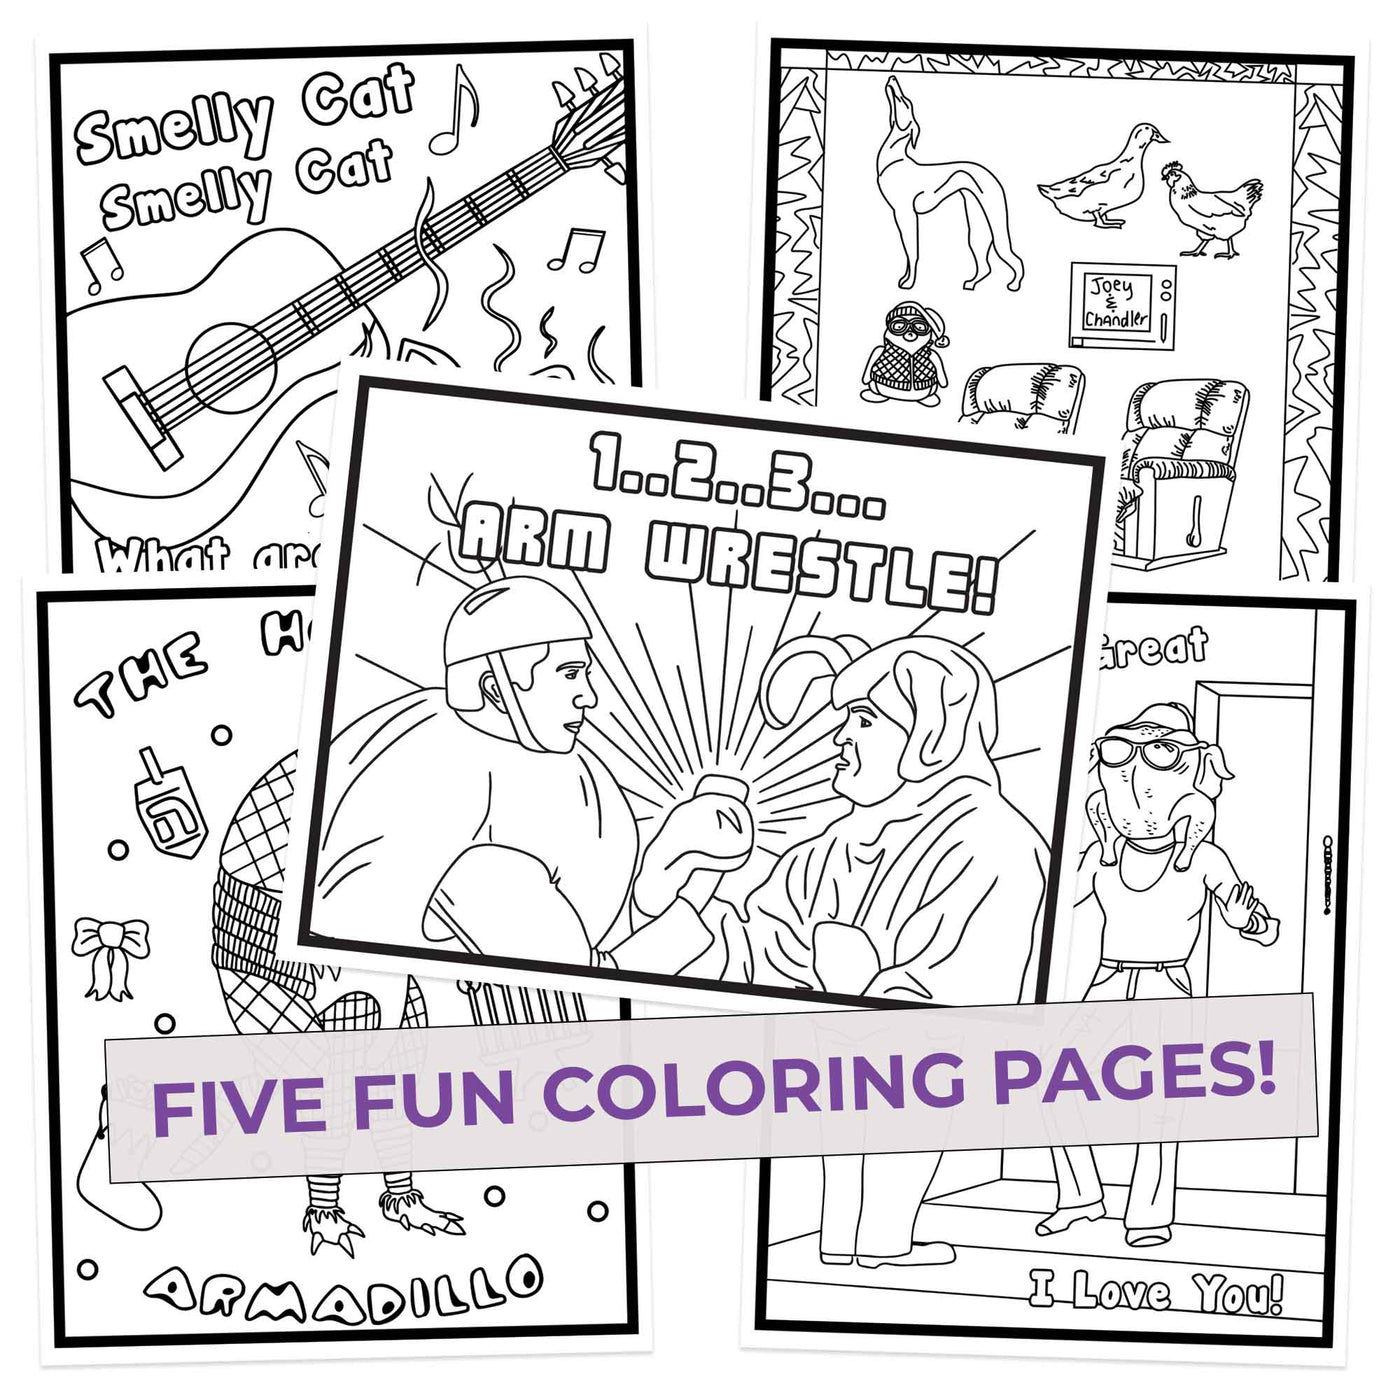 Five The one with the Colors coloring pages, Arm Wrestle, five fun pages